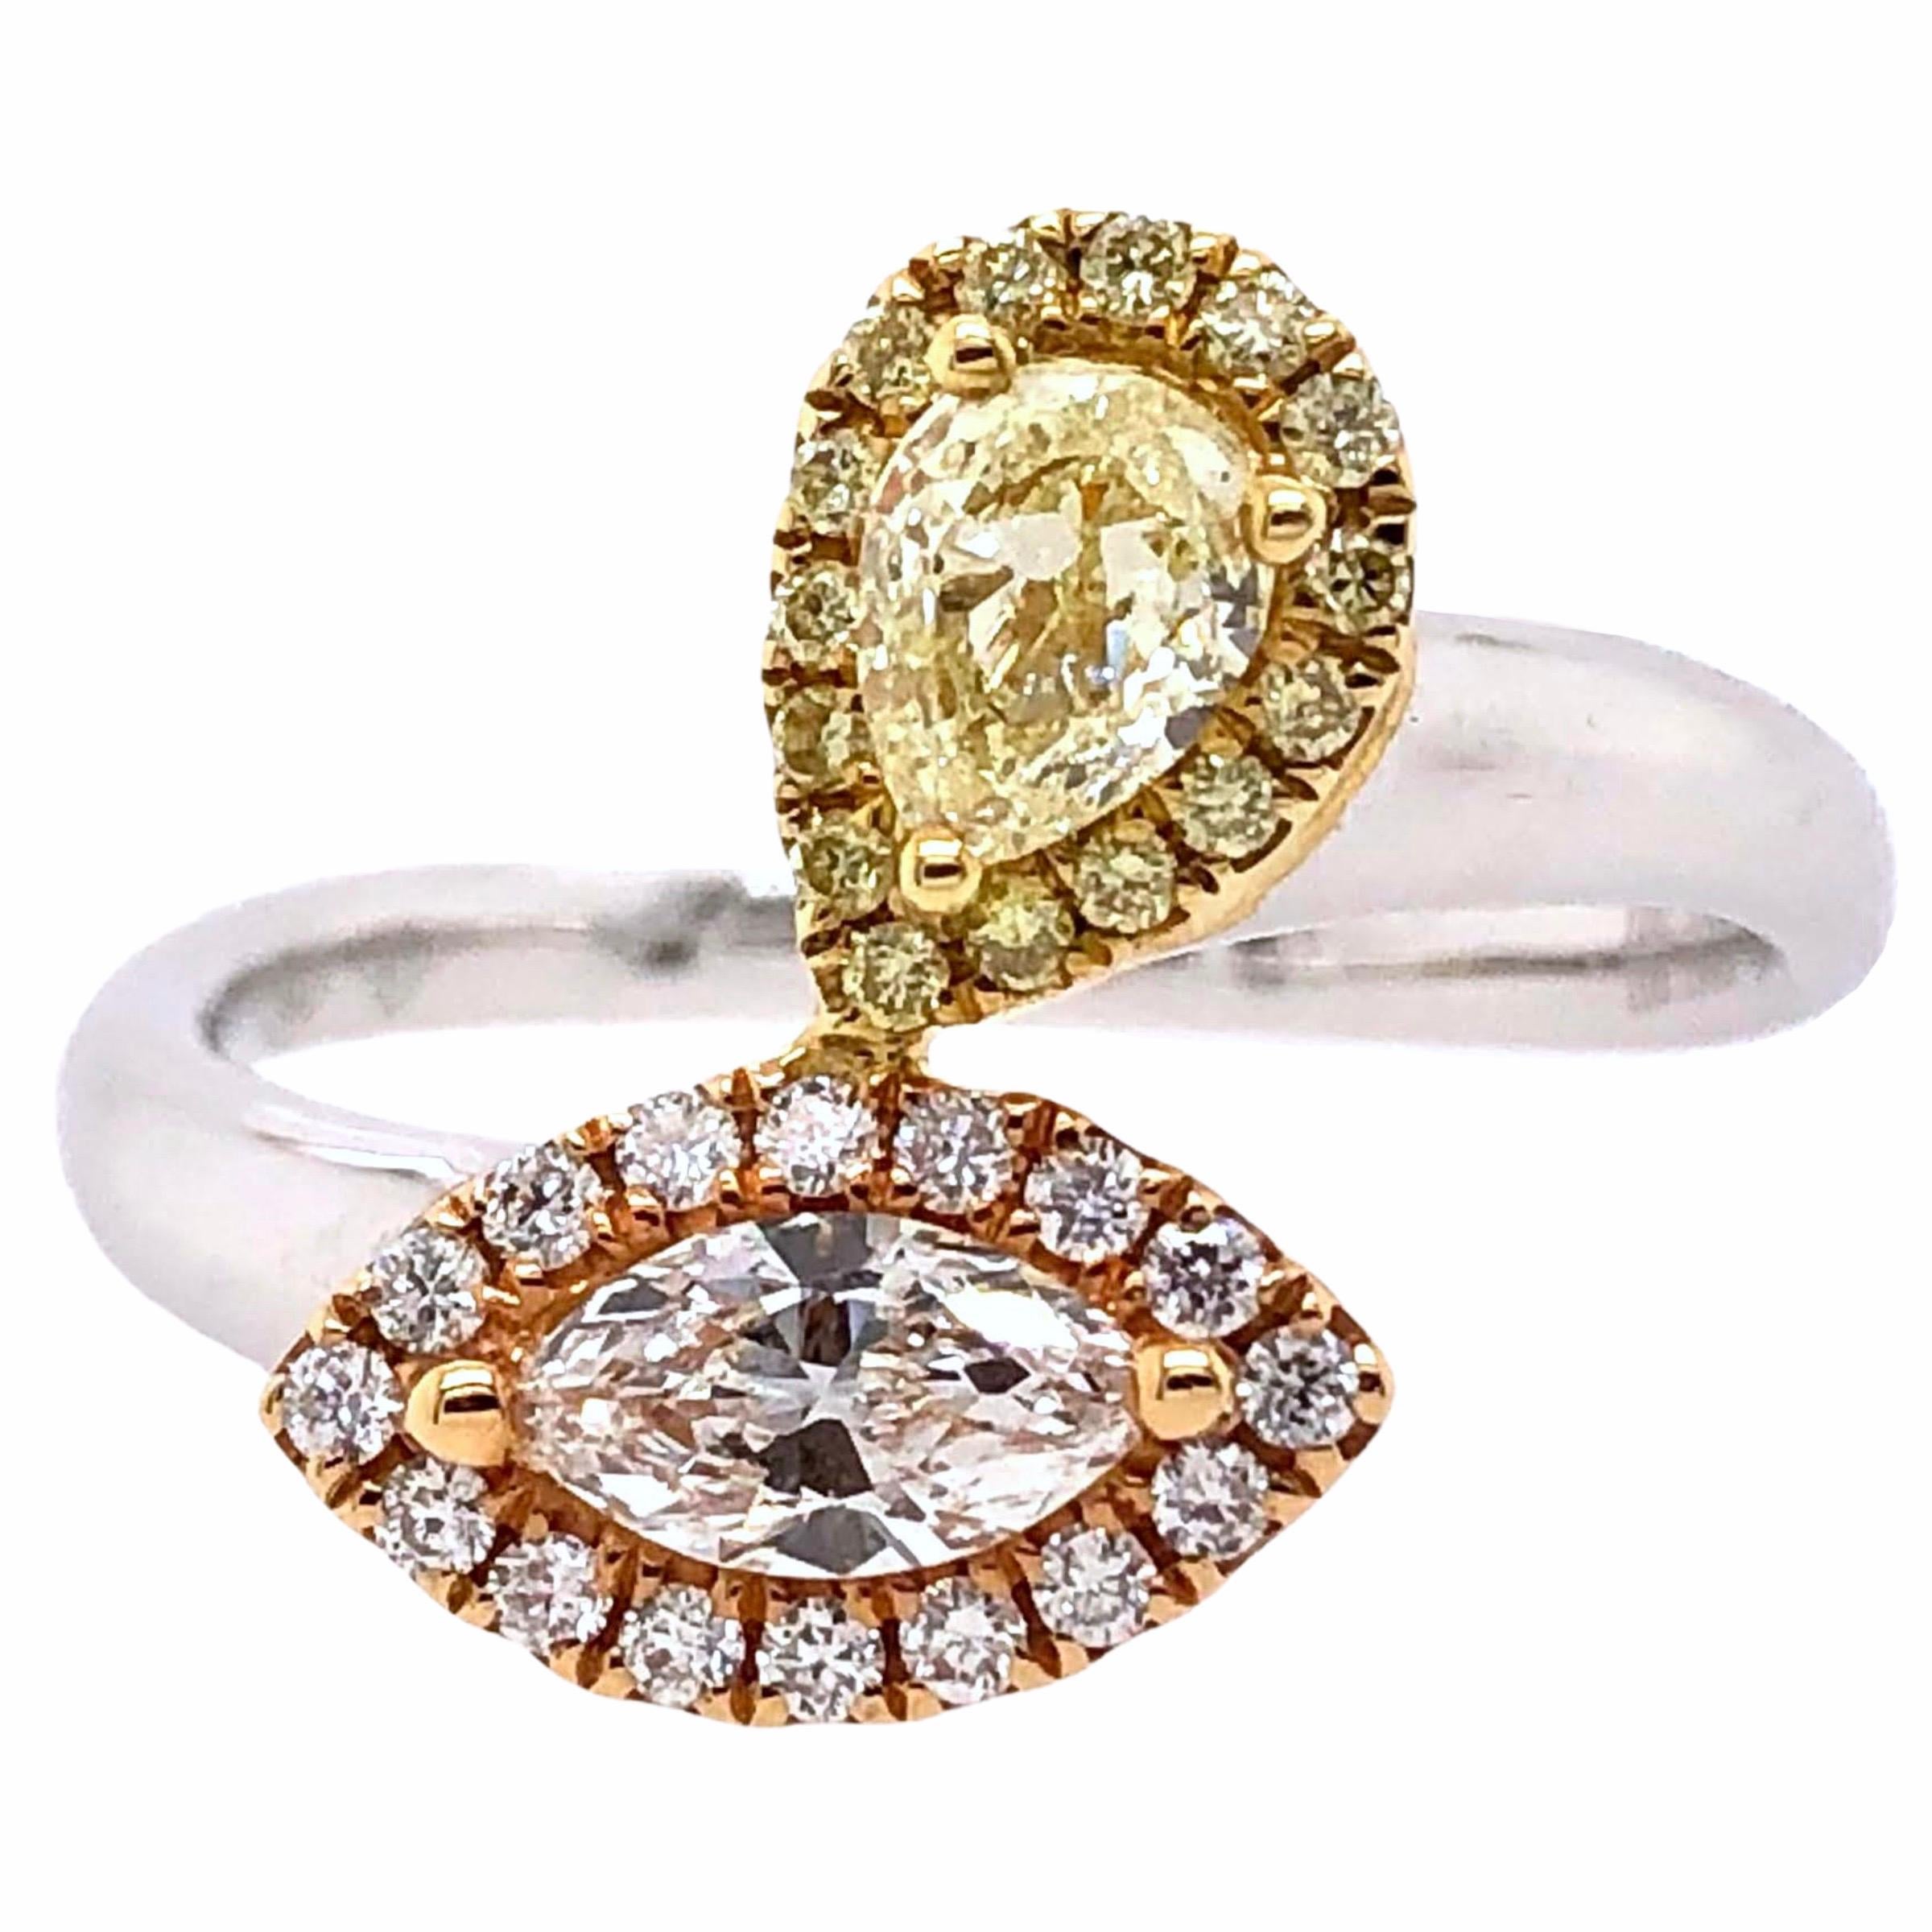 PARIS Craft House Fancy Diamond Ring in 18 Karat White/Yellow Gold.

- 1 Marquise-cut Fancy Yellow Diamond/0.35ct
- 1 Marquise-cut Diamond/0.29ct
- 31 Round Diamonds/0.21ct
- 18K White/Rose/Yellow Gold/3.43g

Designed and crafted at PARIS Craft